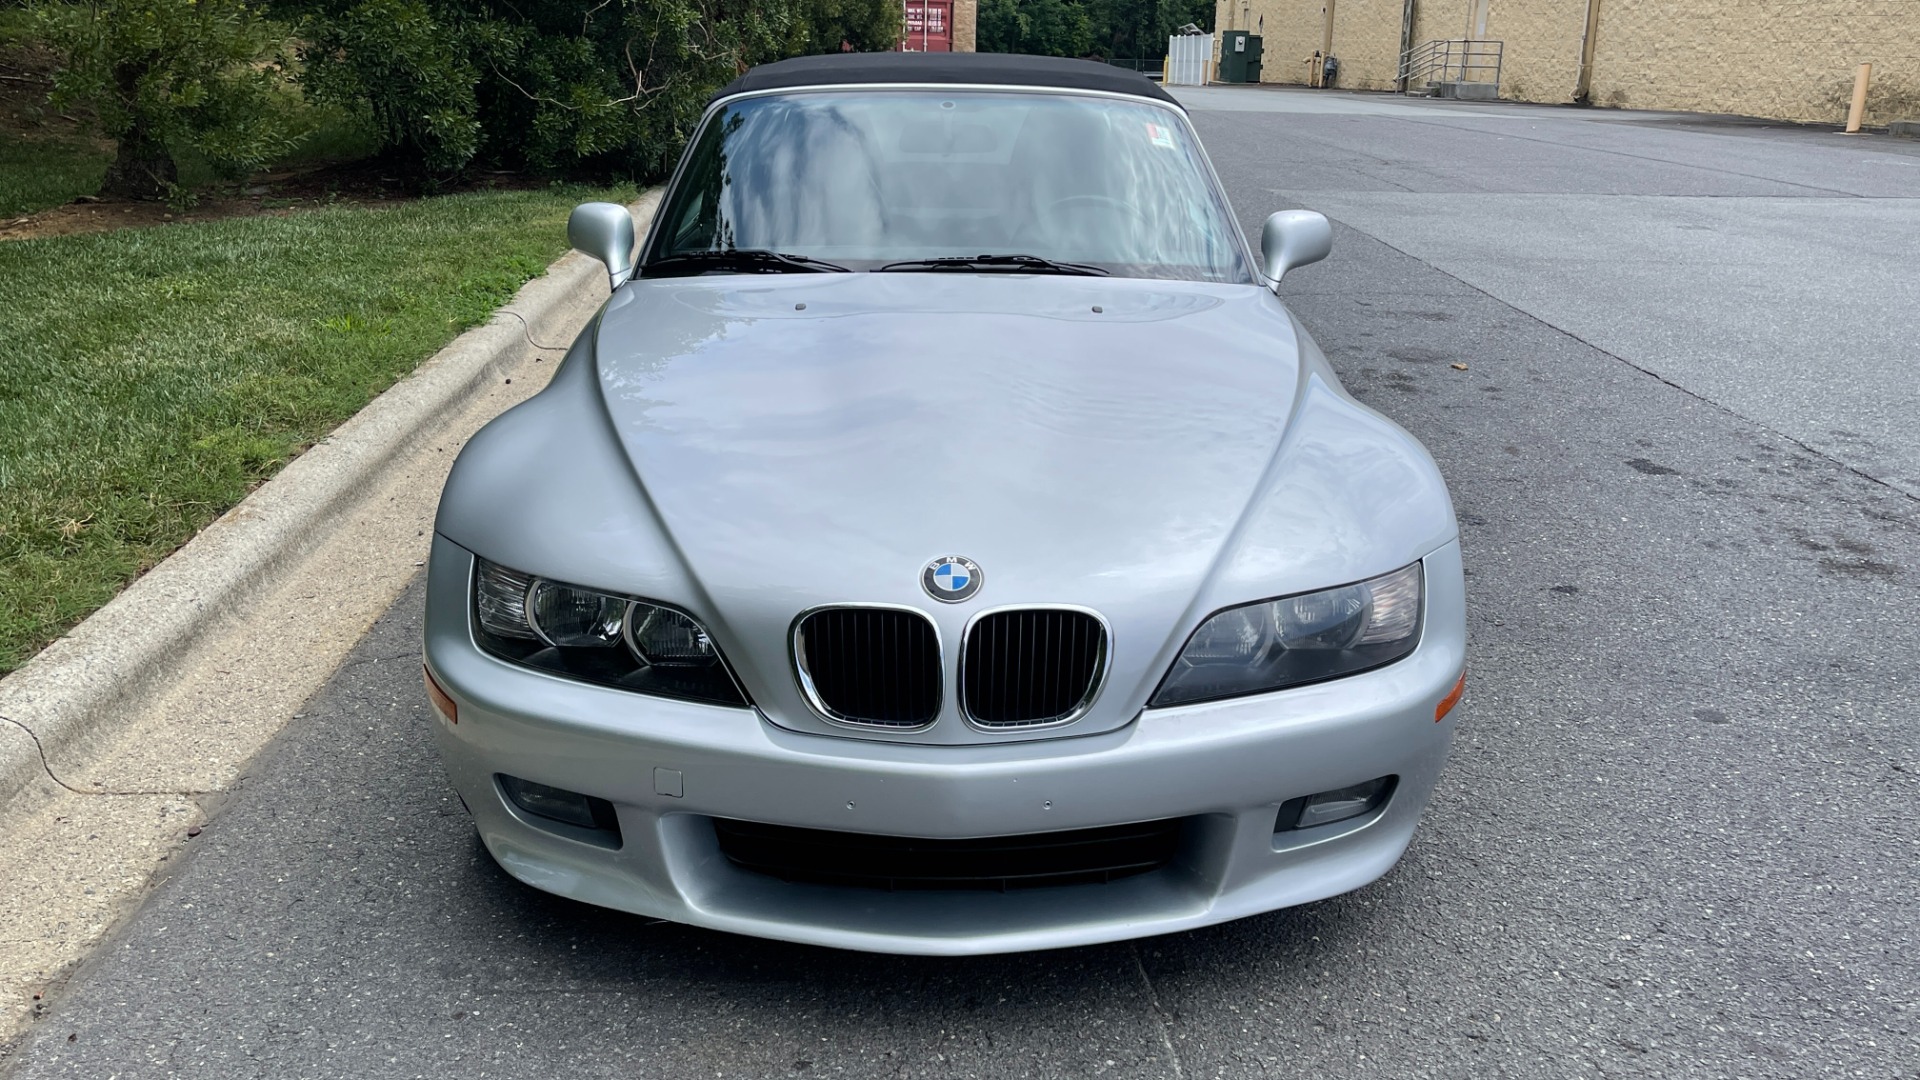 Used 2000 BMW Z3 2.5L / CONVERTIBLE / PWR TOP / AUTOMATIC / HEATED SEATS / LEATHER for sale $12,995 at Formula Imports in Charlotte NC 28227 4